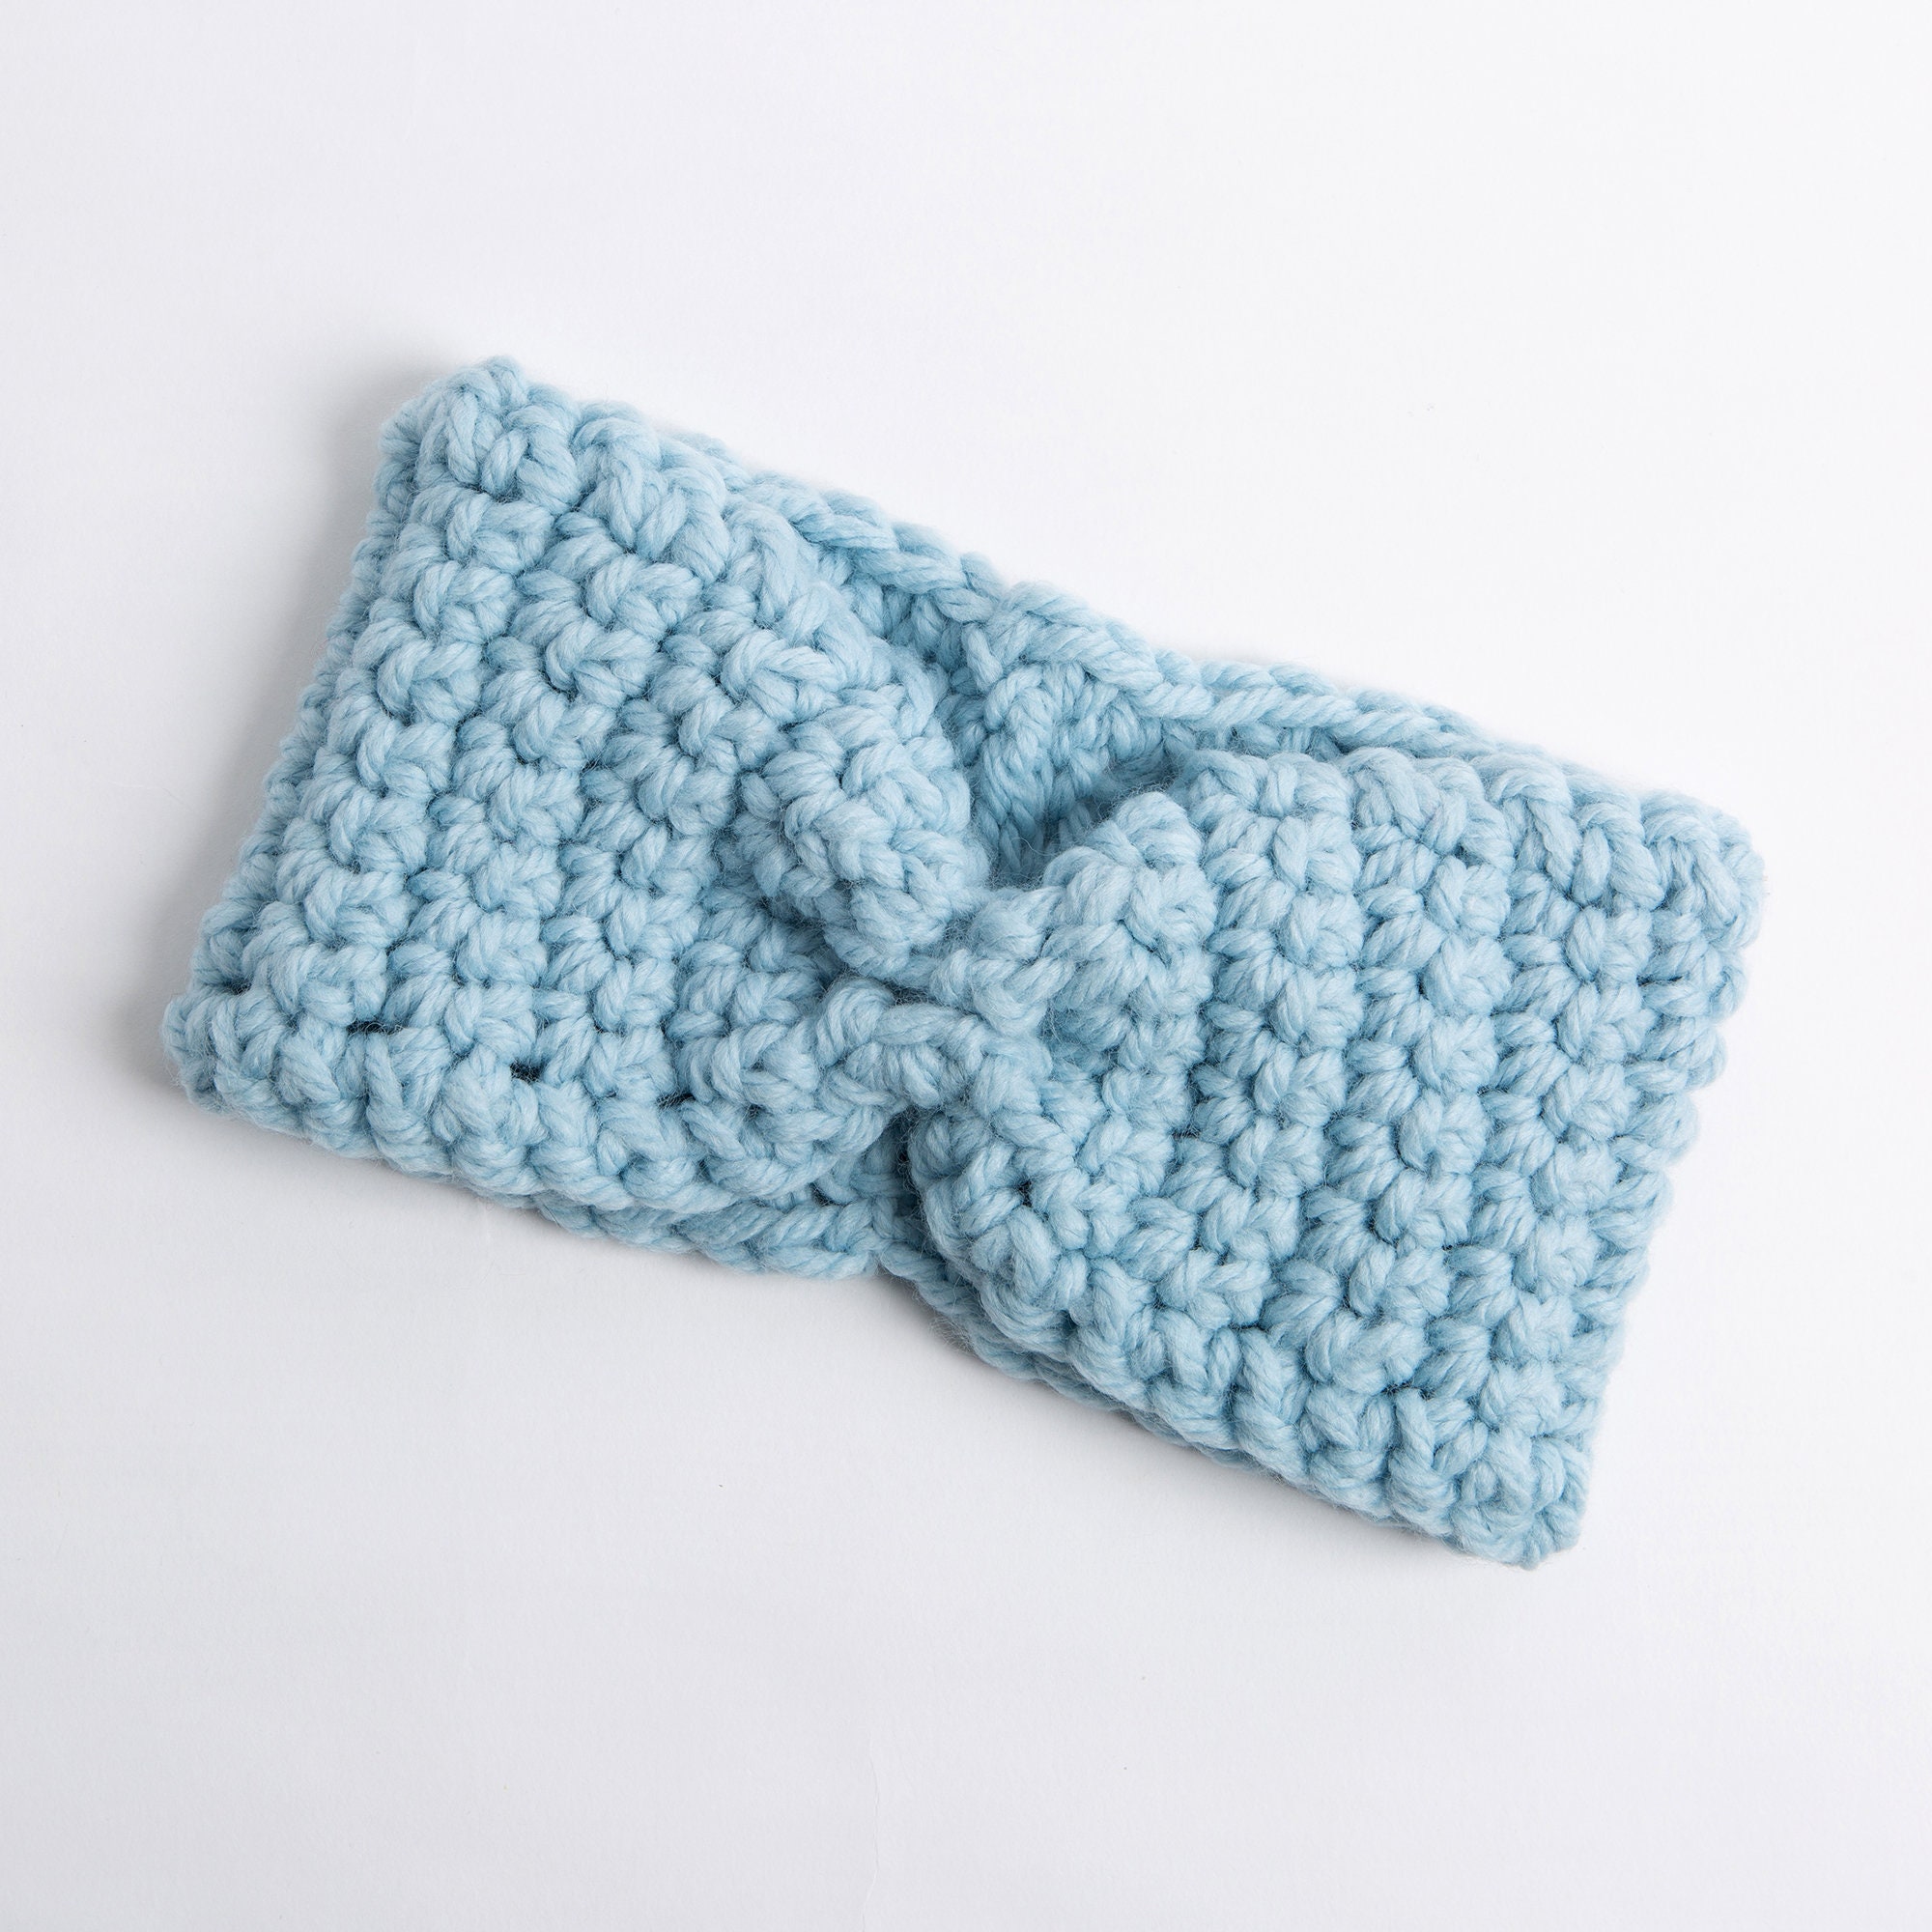 Easy Knitted Ear Warmer Kit: A Beginning Knitting Project 